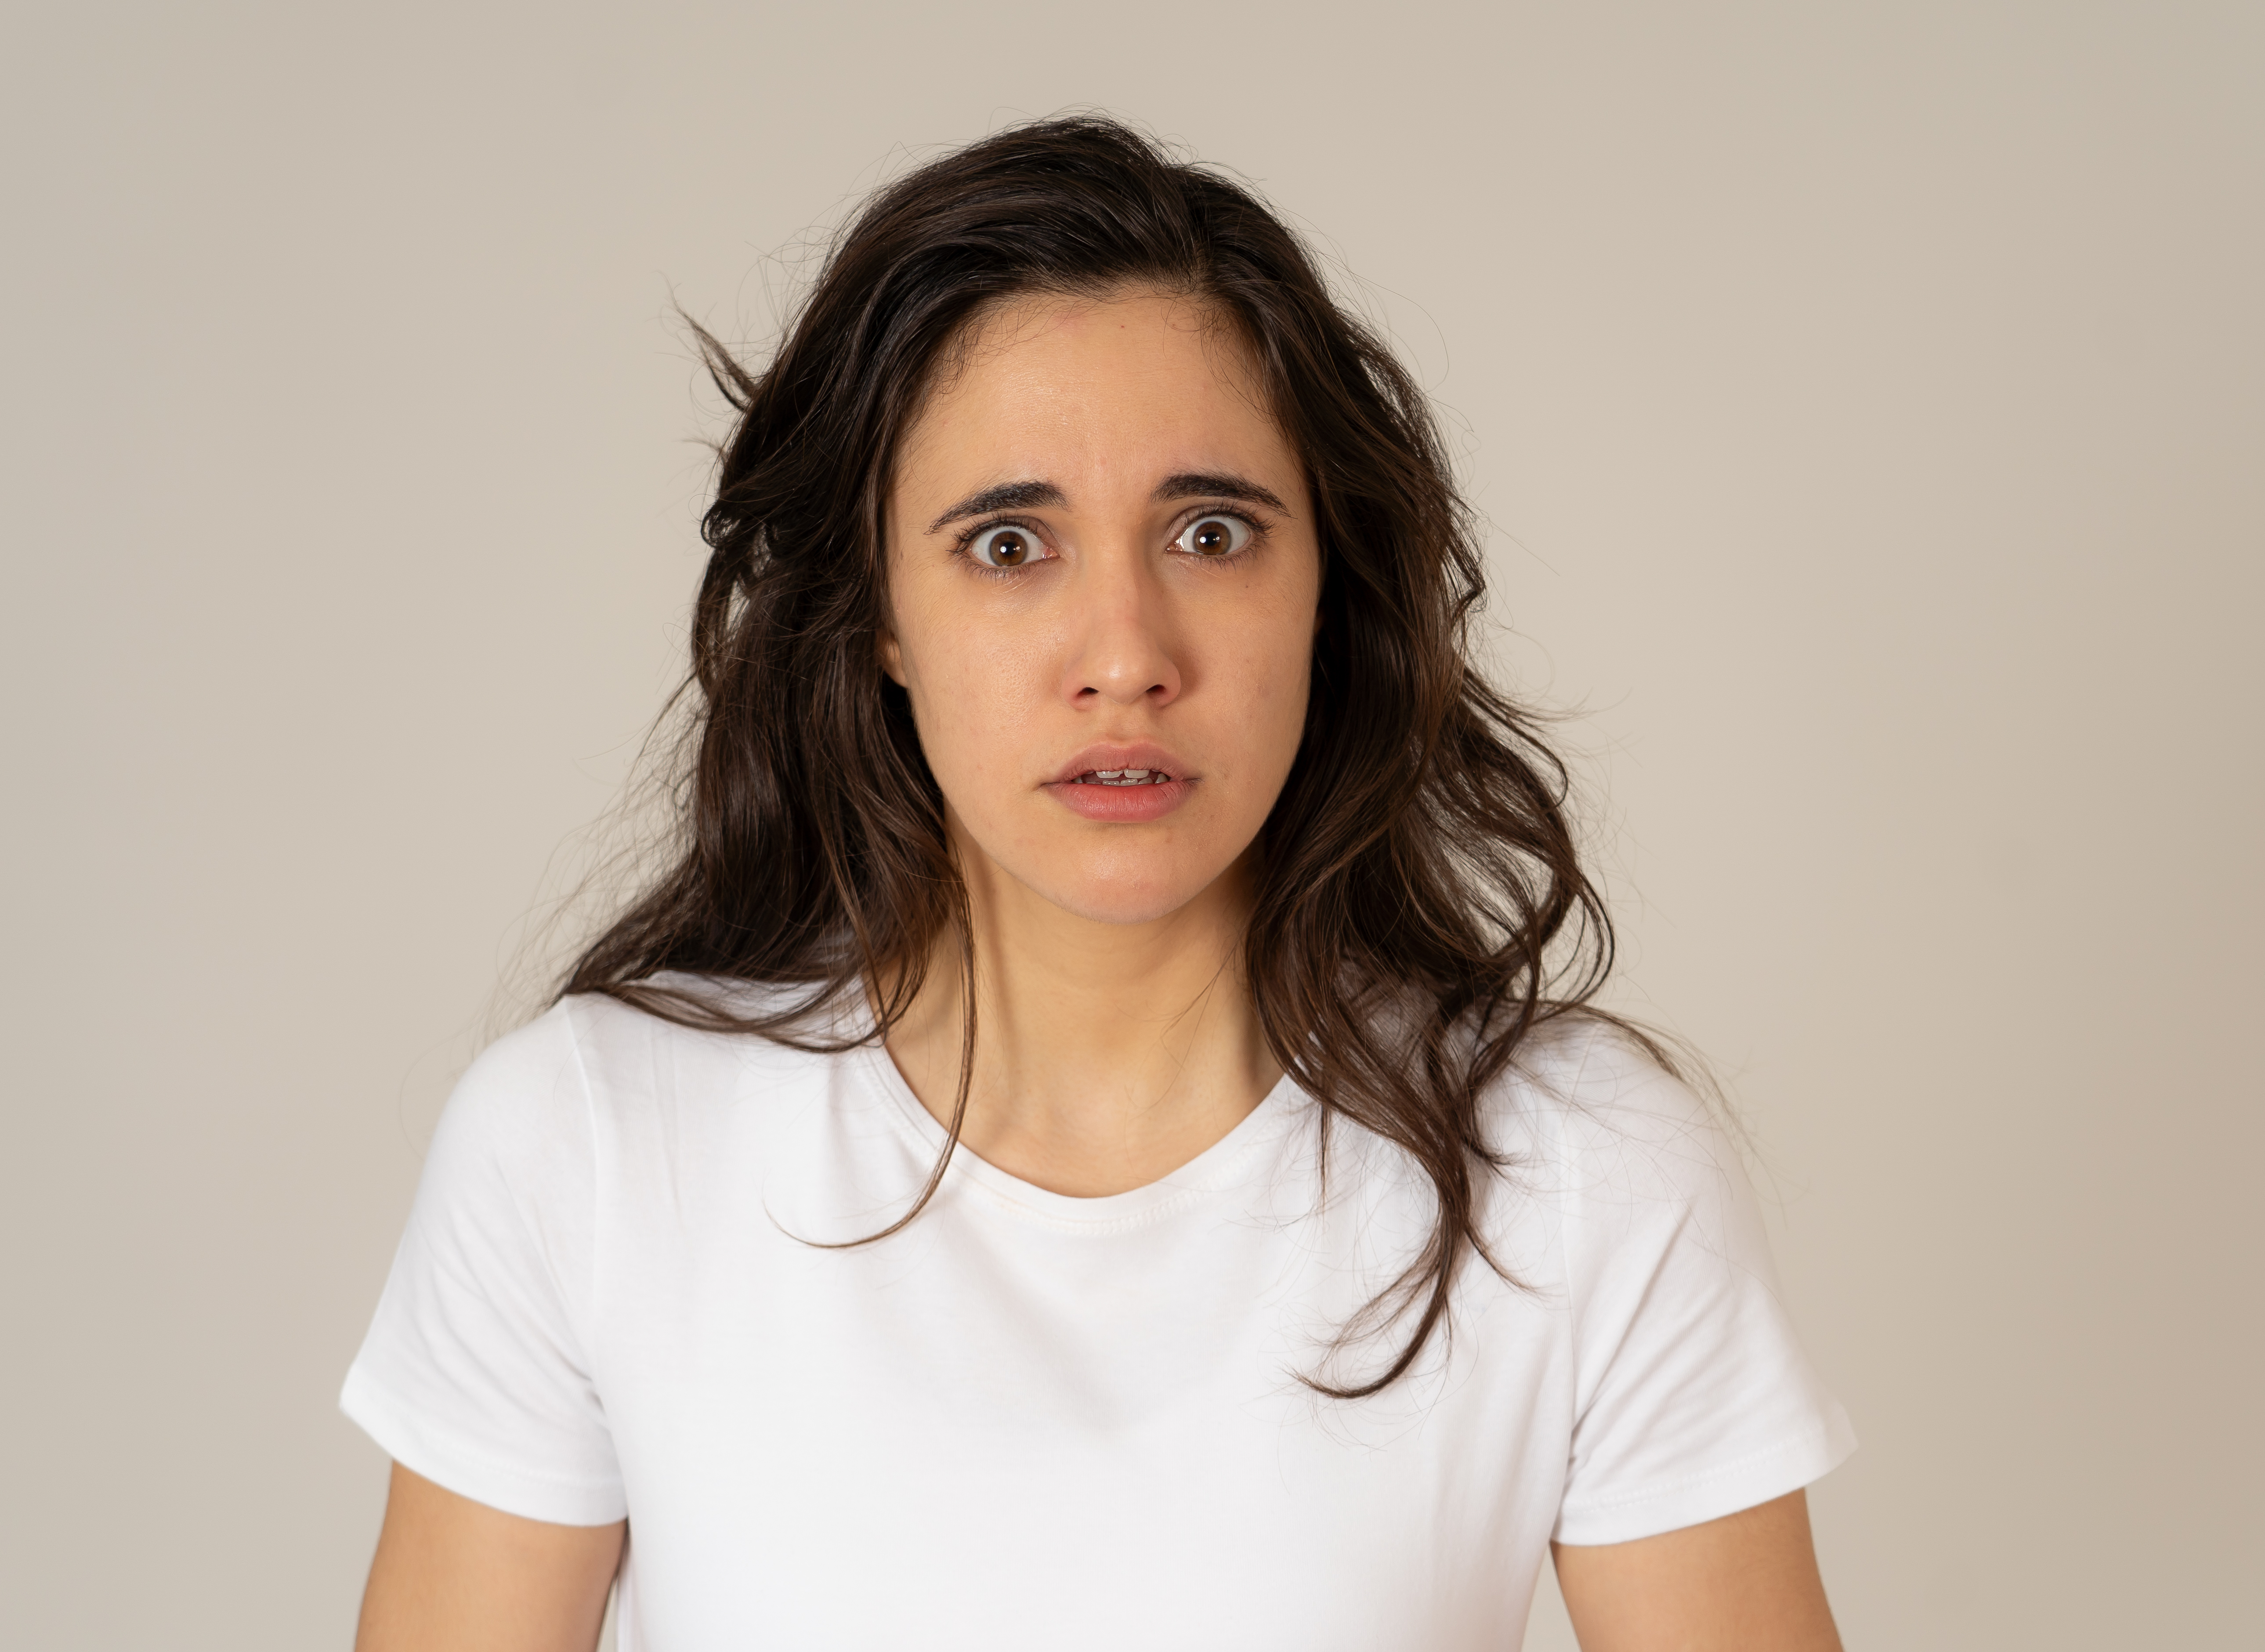 Woman with an expression of shock and confusion | Source: Shutterstock